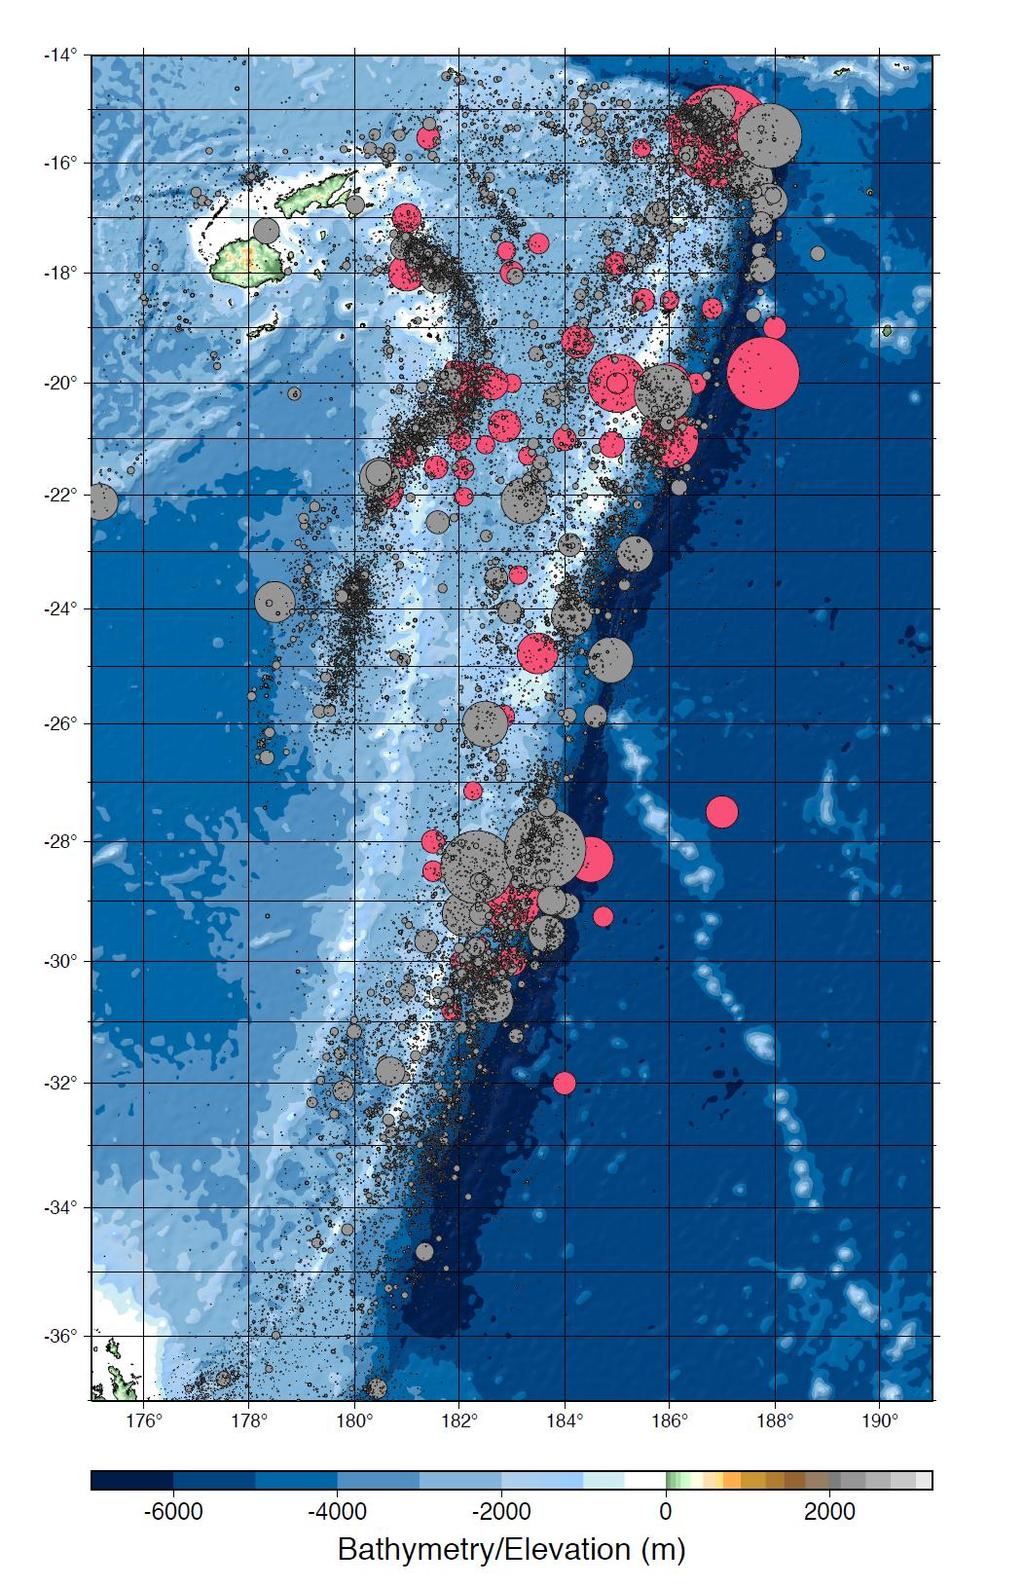 Figure 10. Historic seismicity along the Tonga-Kermadec Trench.